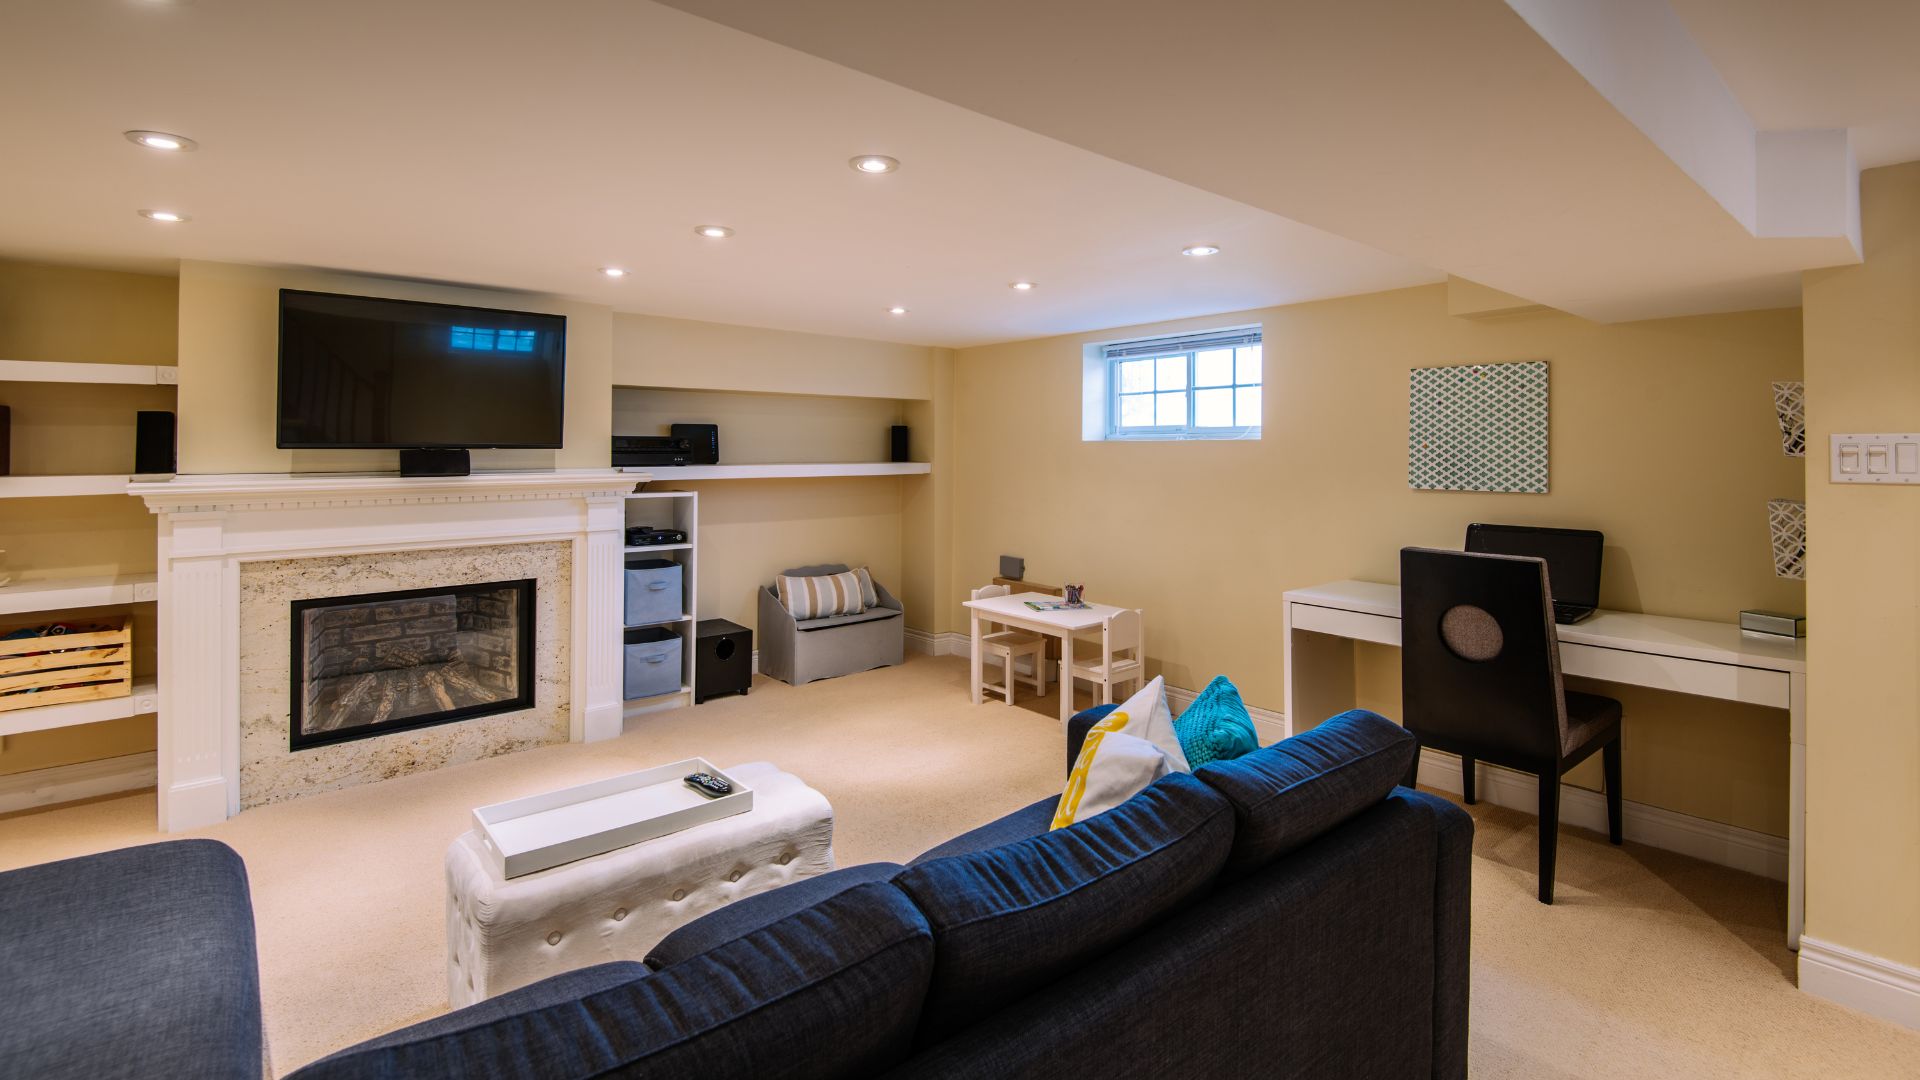 Basement entertainment room with sofa and TV, and fireplace